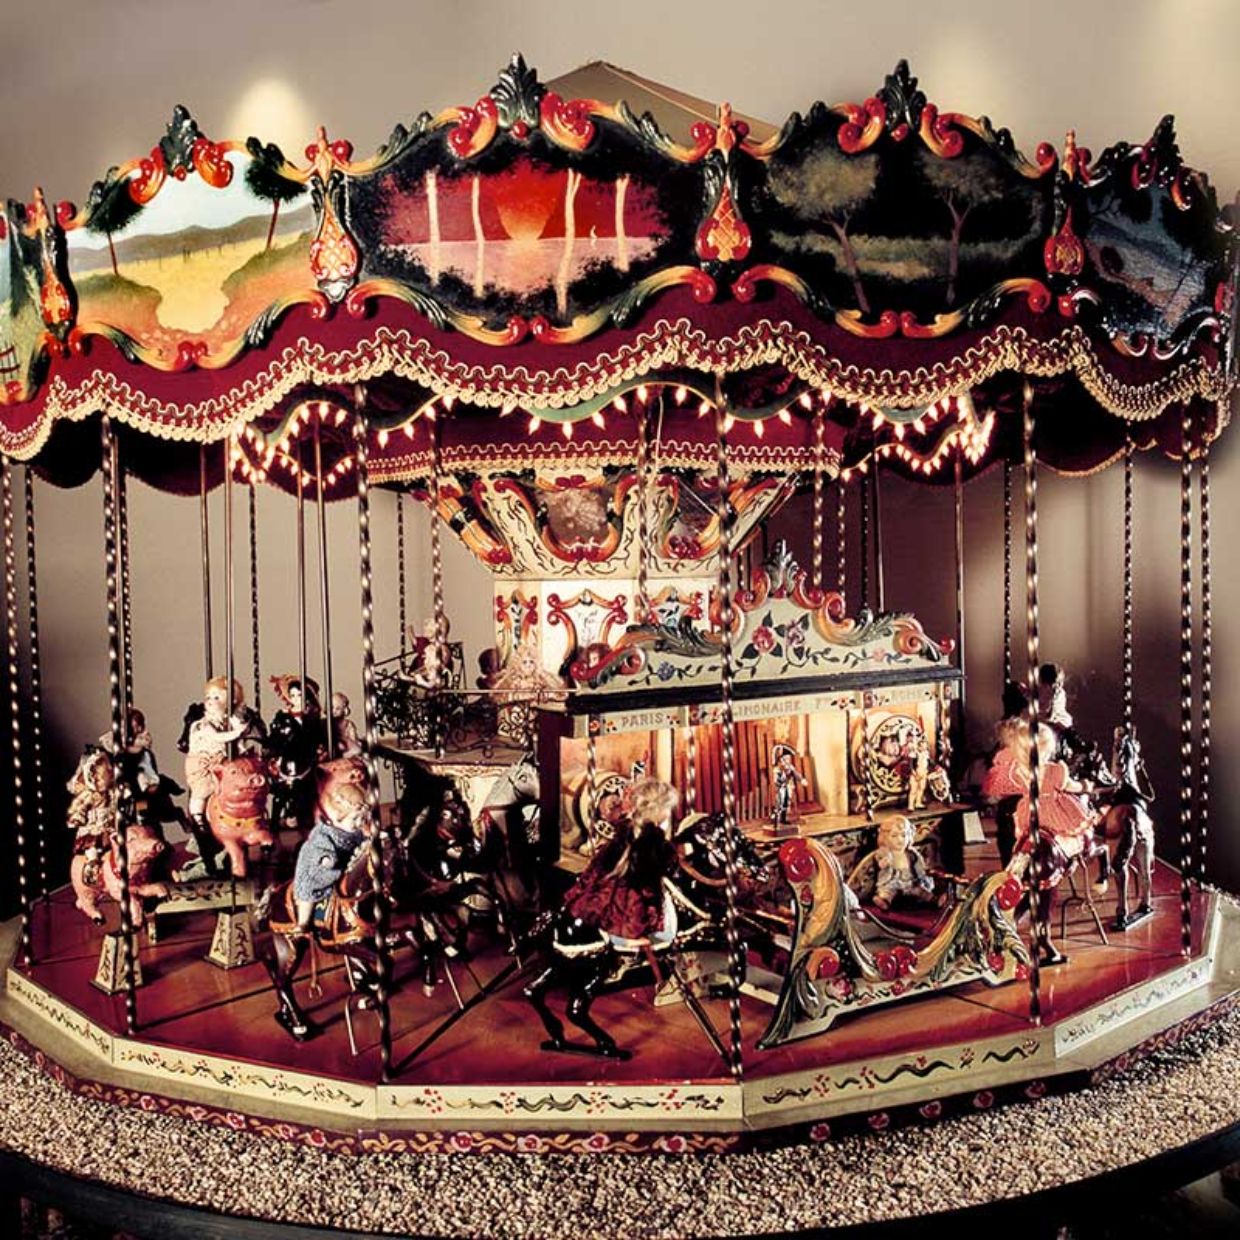 Carrousel, 1900, Other countries